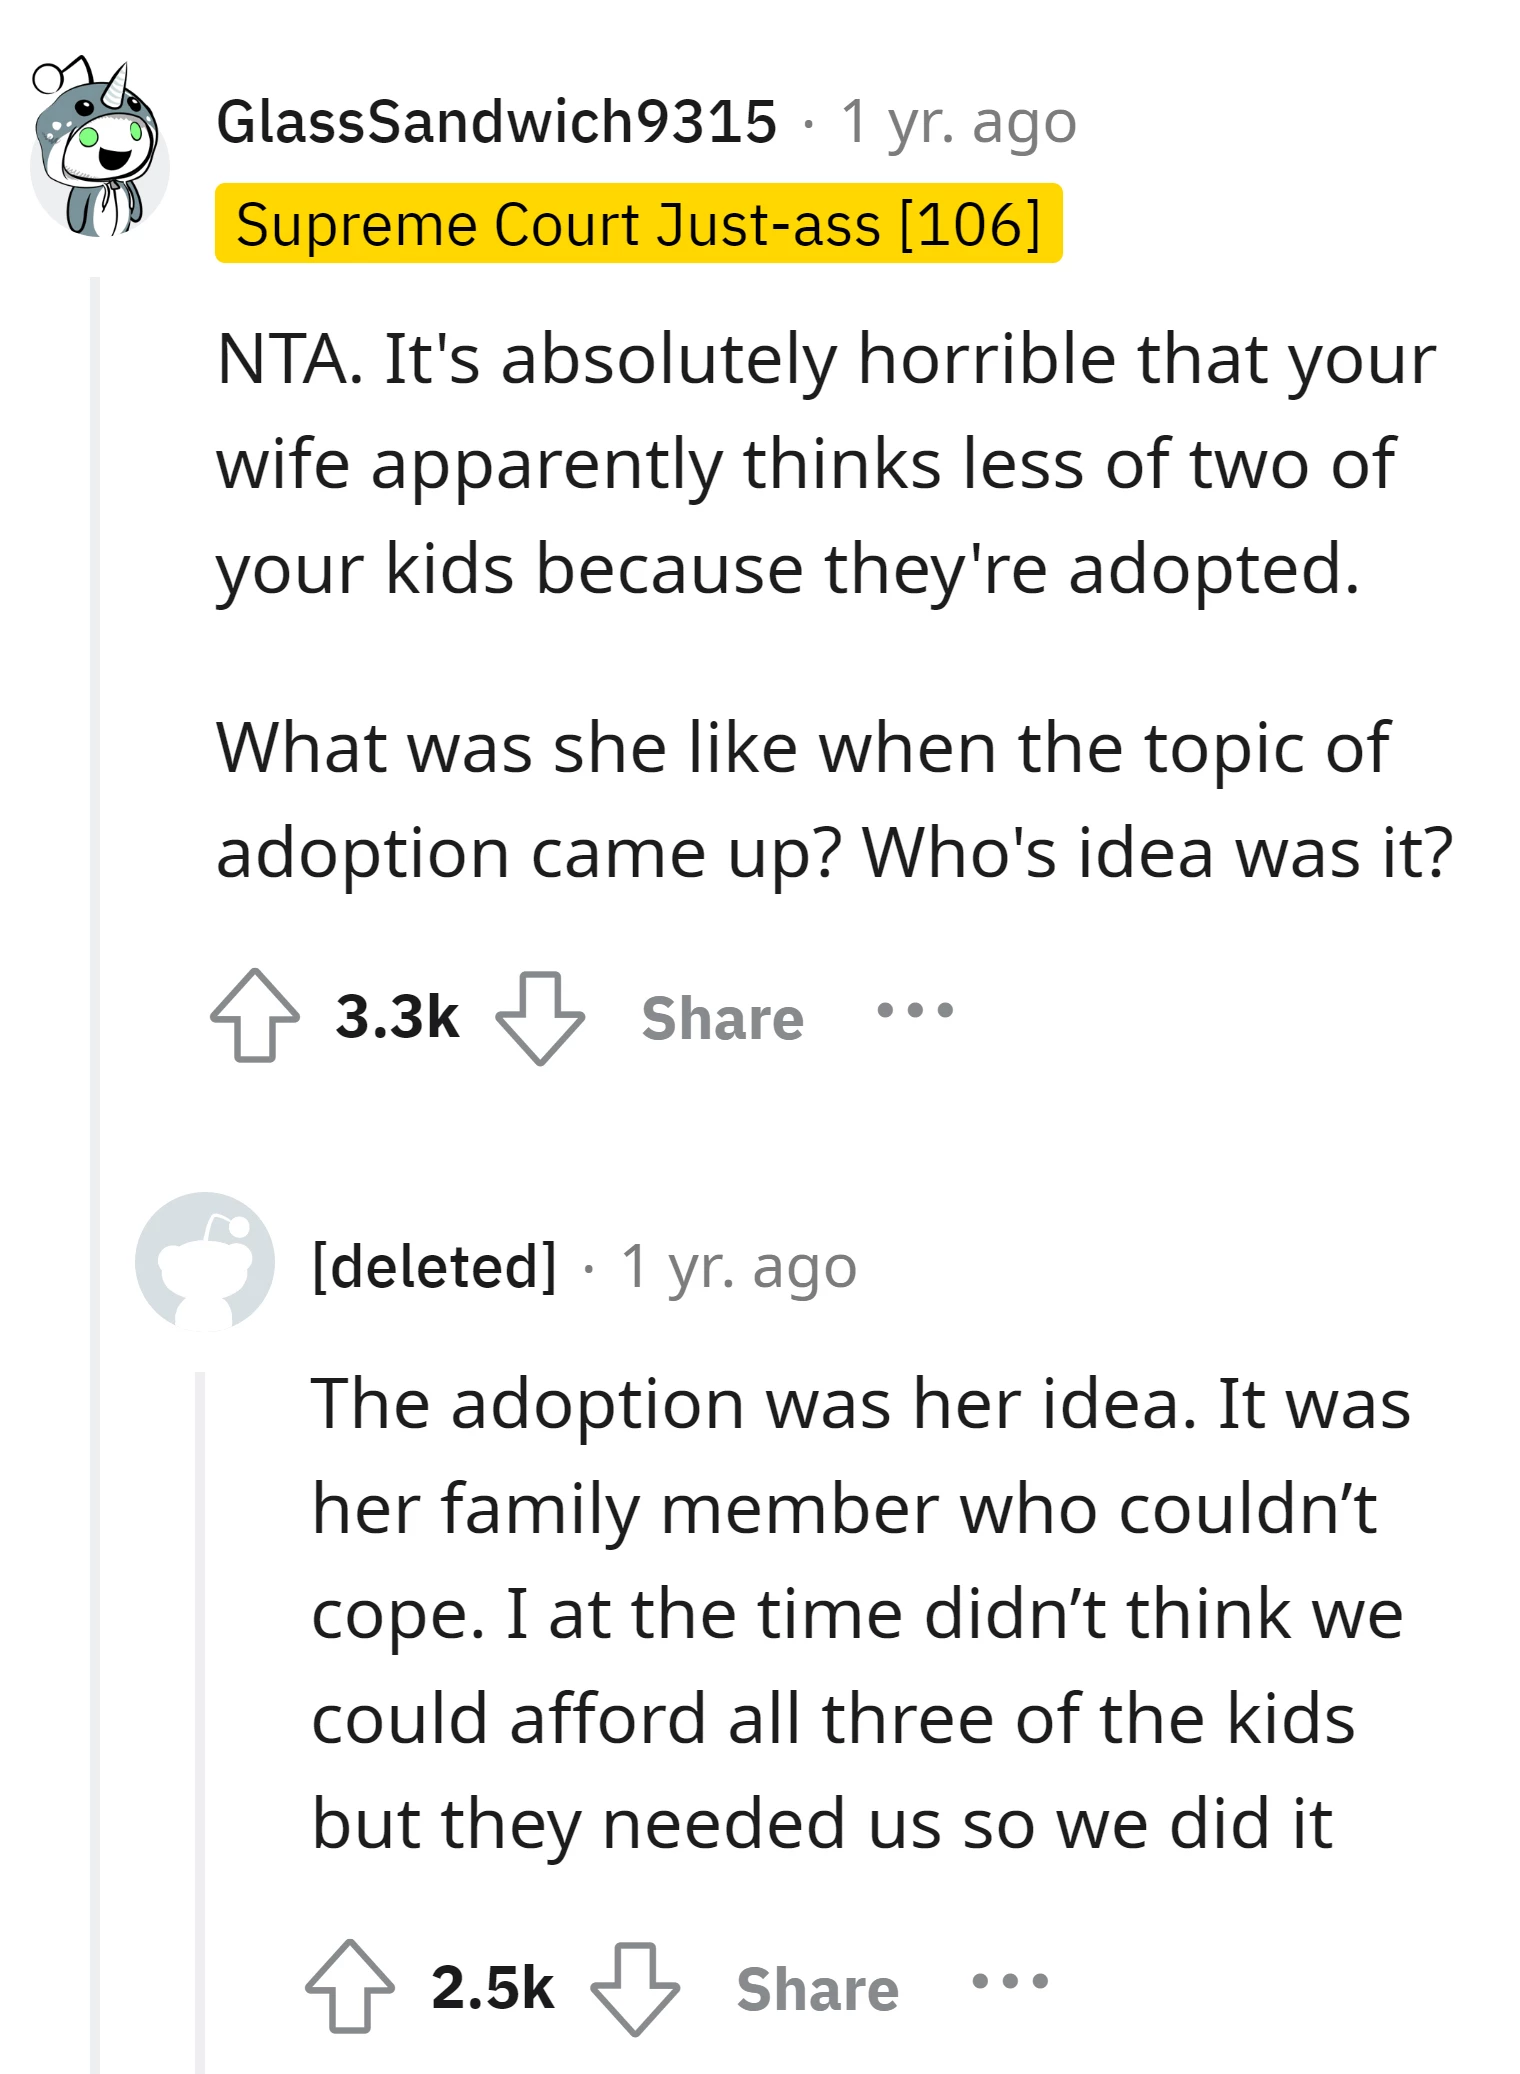 It's terrible if the wife values the adopted children less